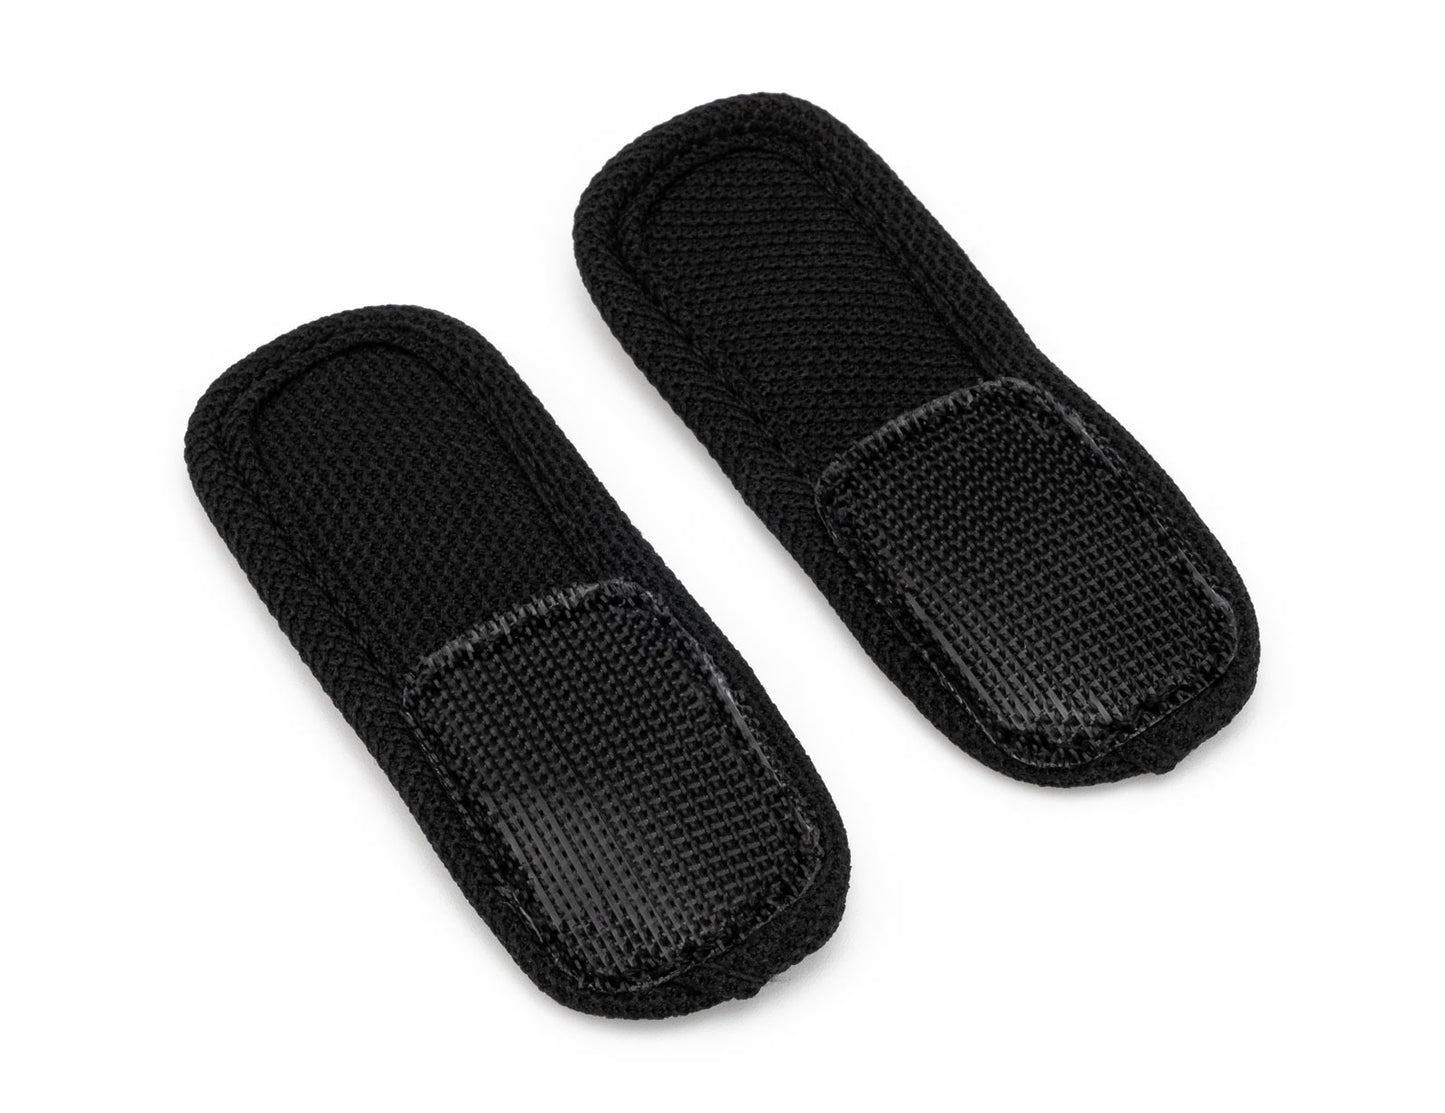 Strap Extenders and Insoles